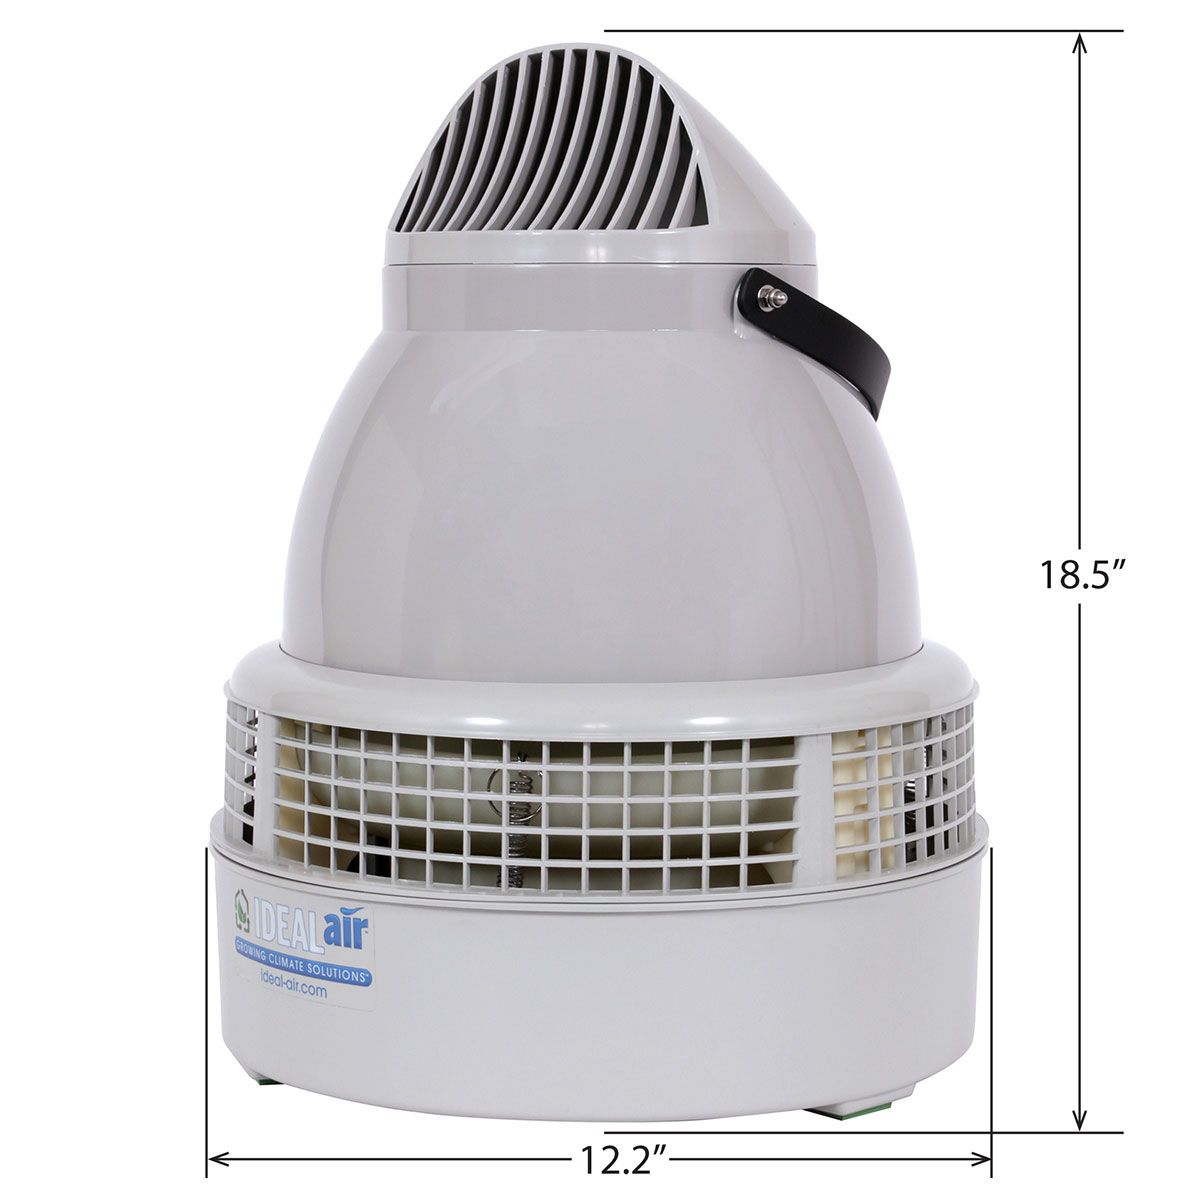 Ideal-Air Commercial Grade Humidifier 75 Pint